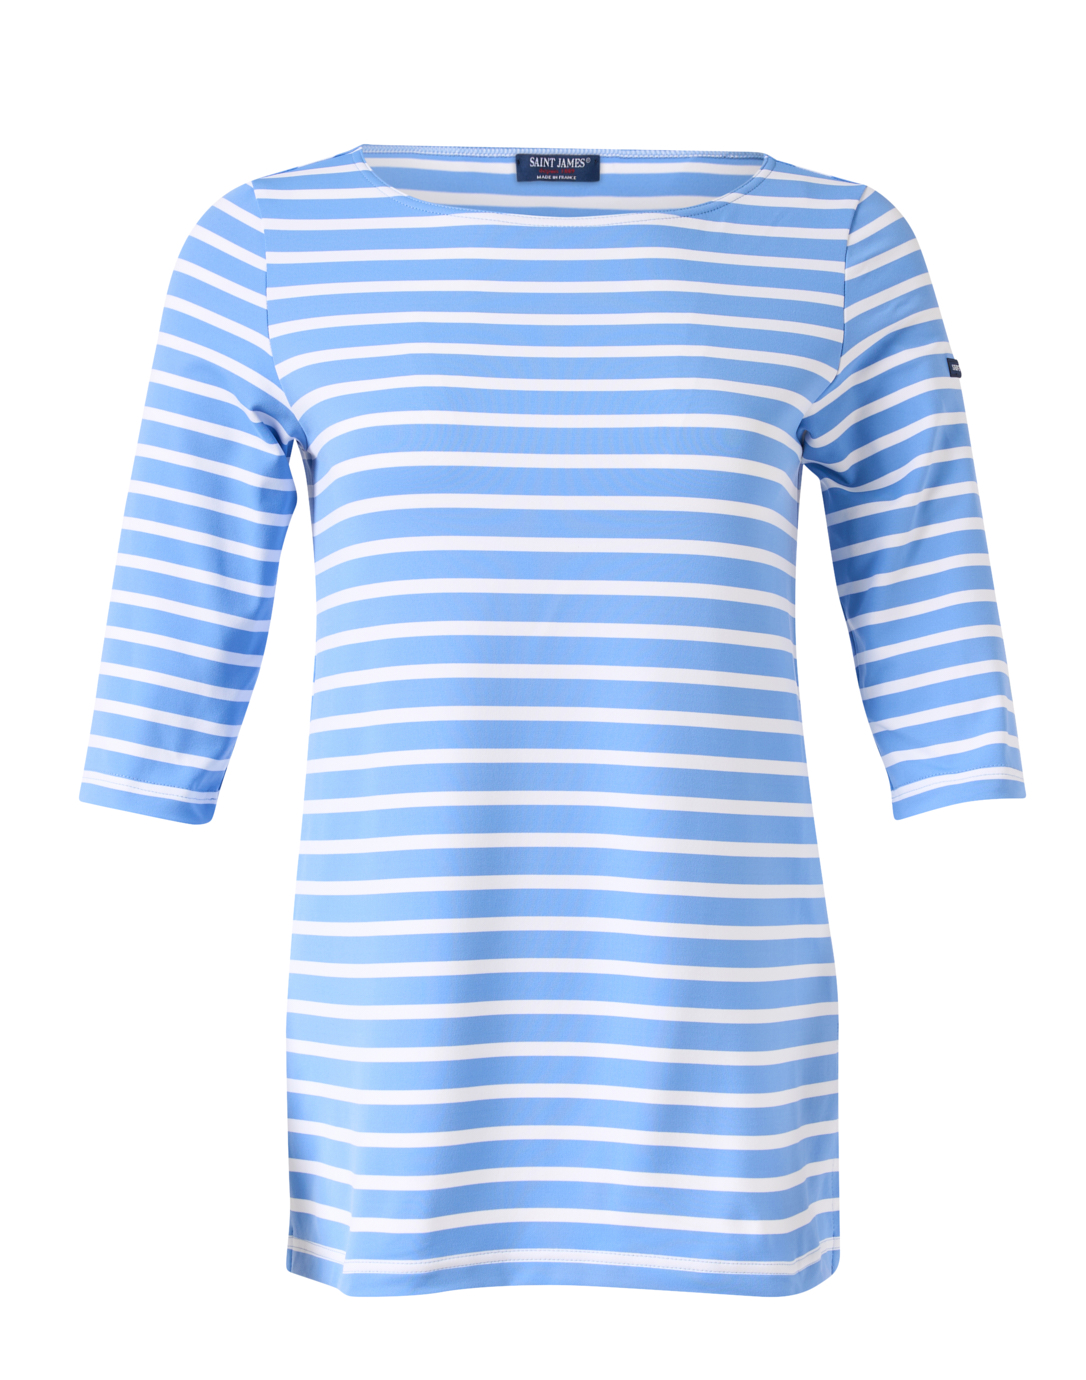 NEW MENS LADIES FANCY DRESS SHIP SAILOR STYLE BLUE AND WHITE STRIPED T SHIRT TOP 